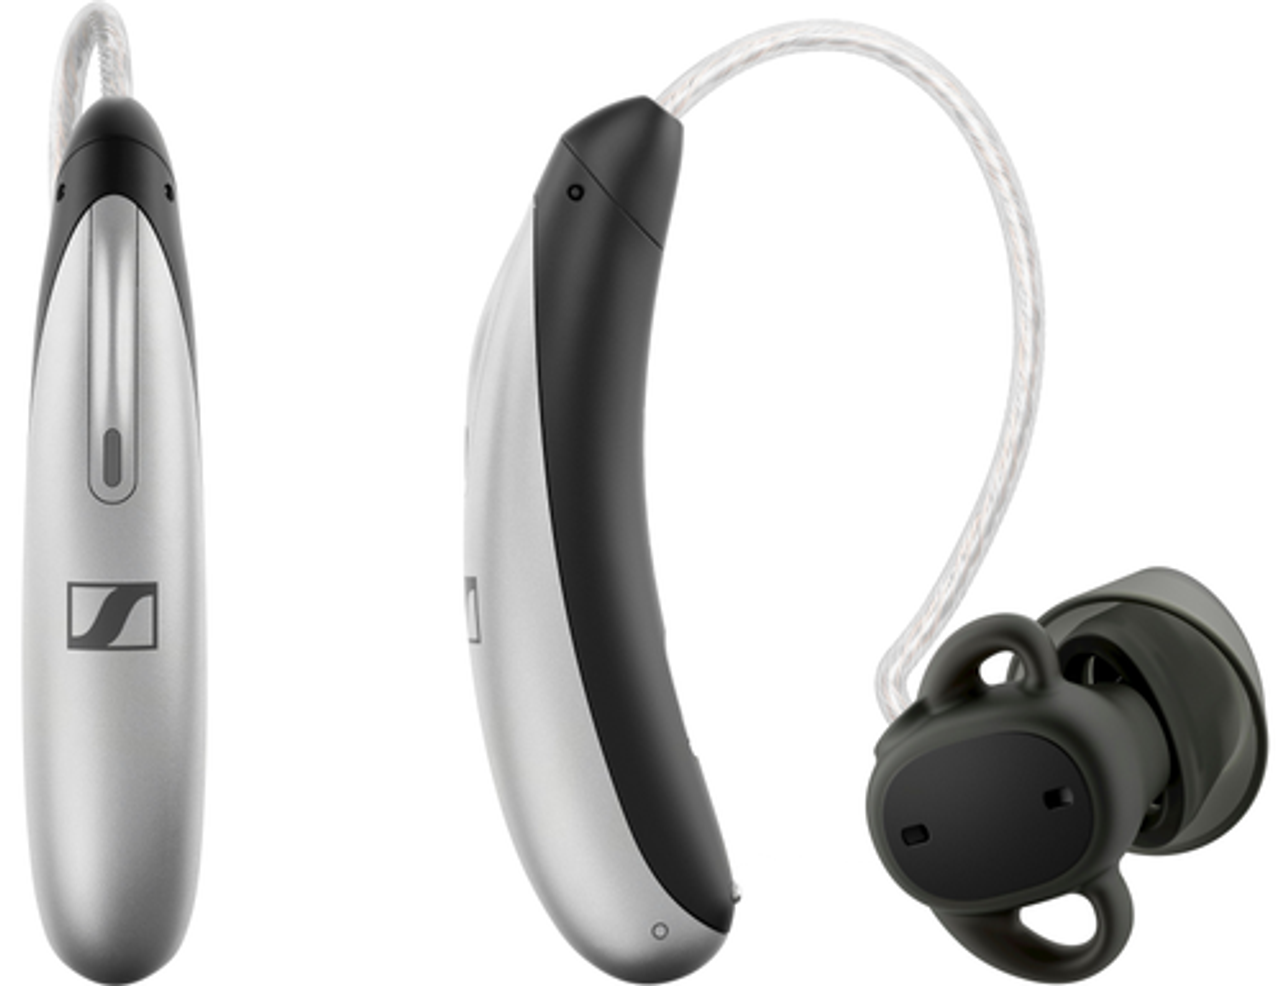 Sennheiser - All-Day Clear Slim - OTC Self-Fitting Hearing Aid for Mild to Moderate Hearing Loss – All-Day Wear & Bluetooth - Gray